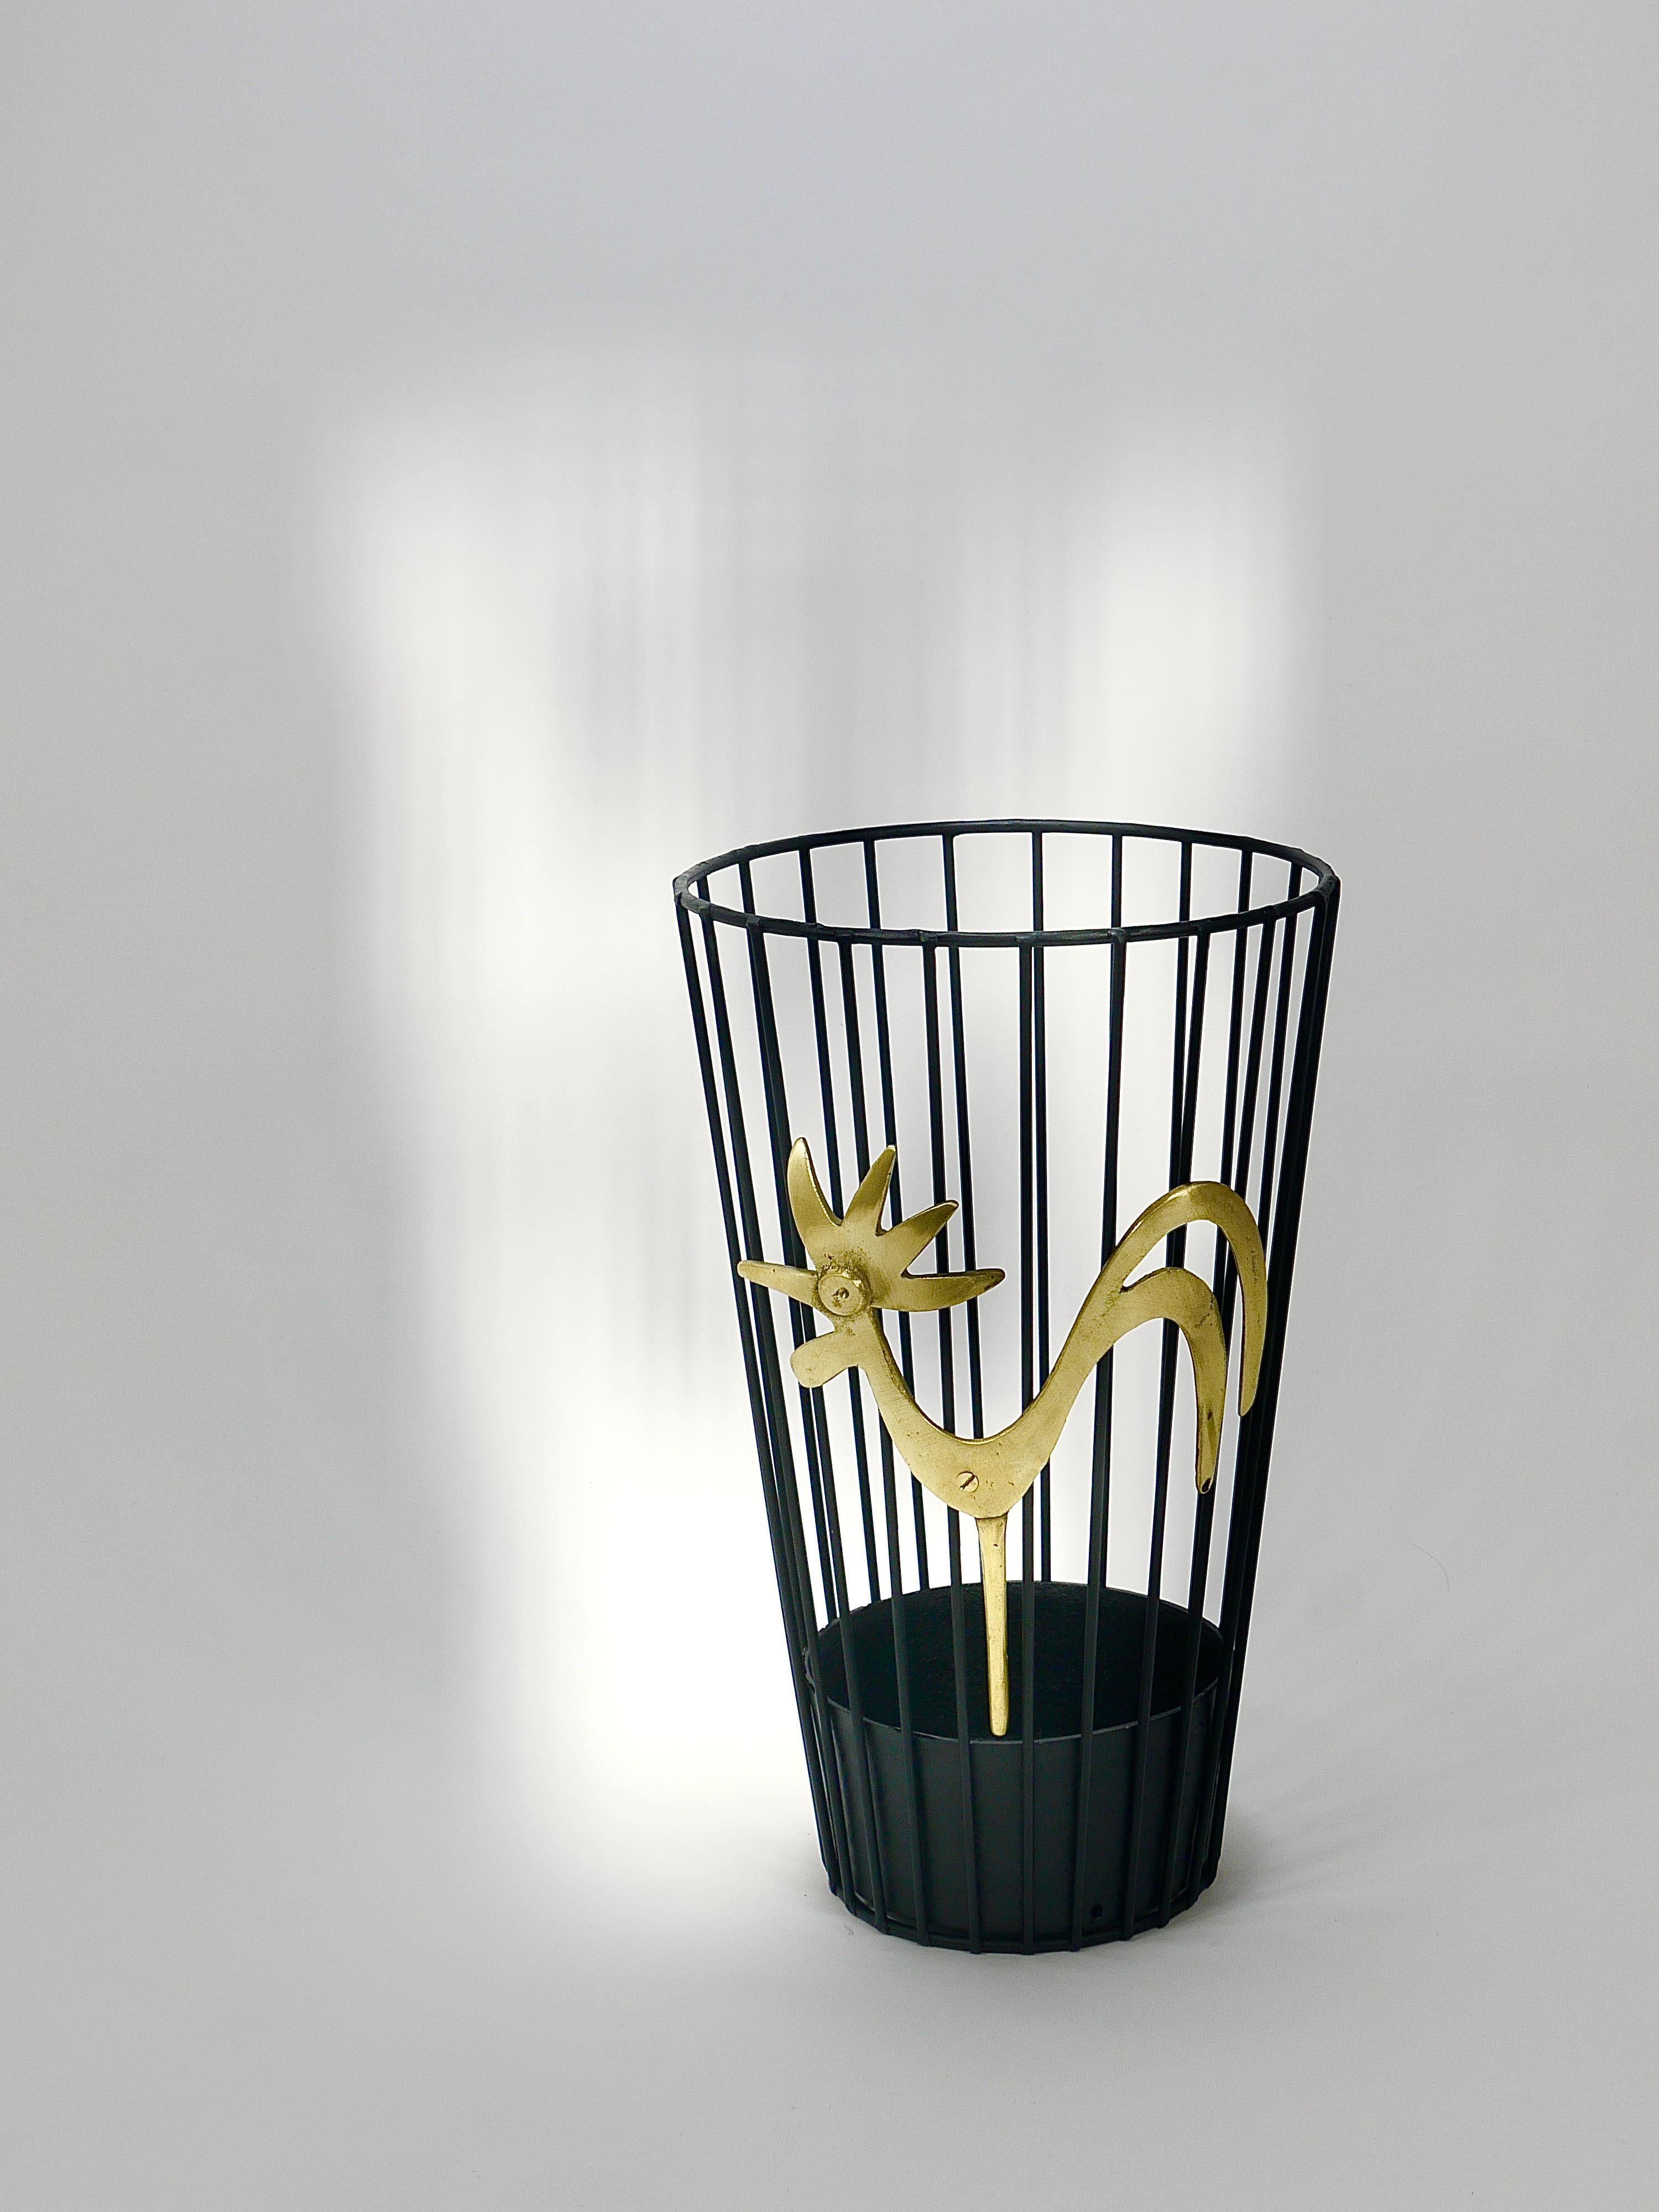 This striking umbrella stand, which can also serve as a paper basket or wastepaper bin, dates back to the 1950s. Designed by Walter Bosse and crafted by Hertha Baller in Vienna, Austria, it is made from metal with a black finish. The front is